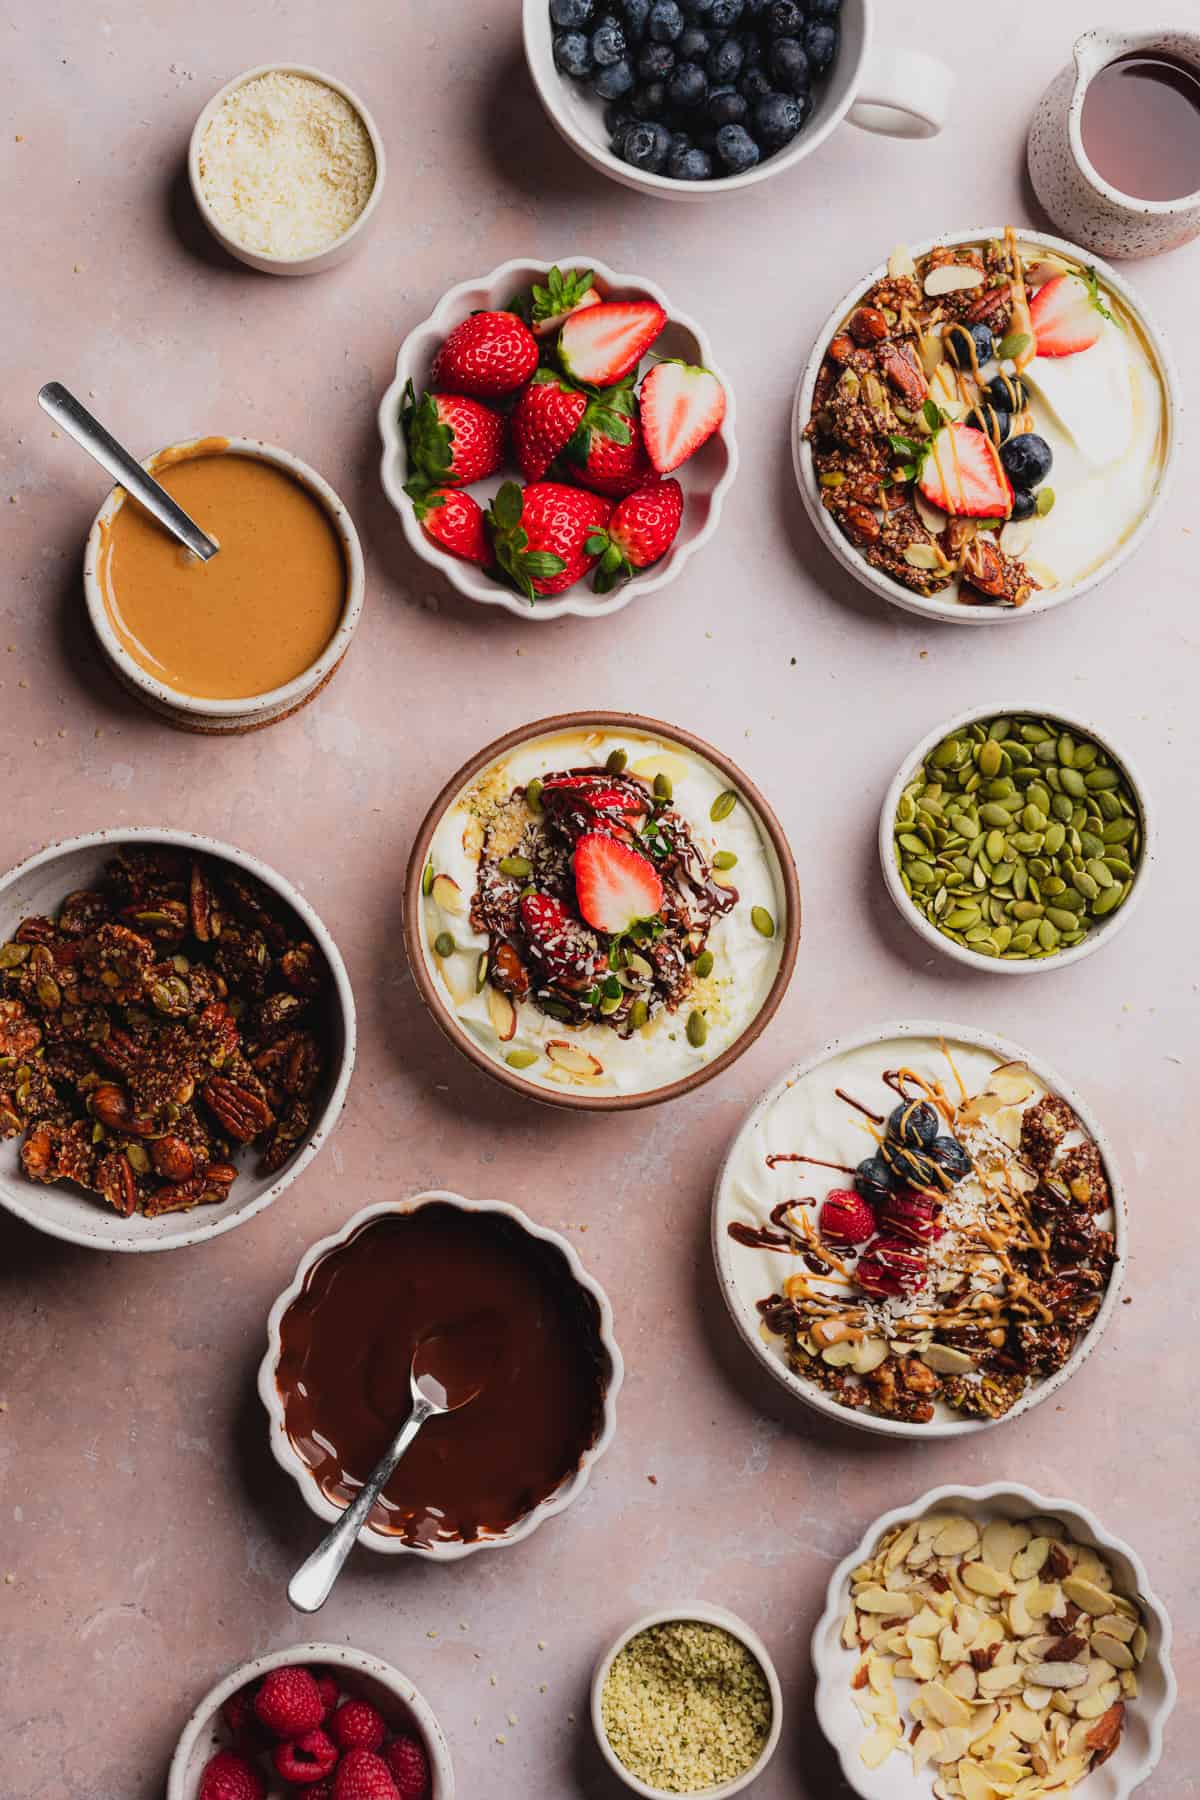 yogurt with granola and fruit, chocolate and peanut butter. 